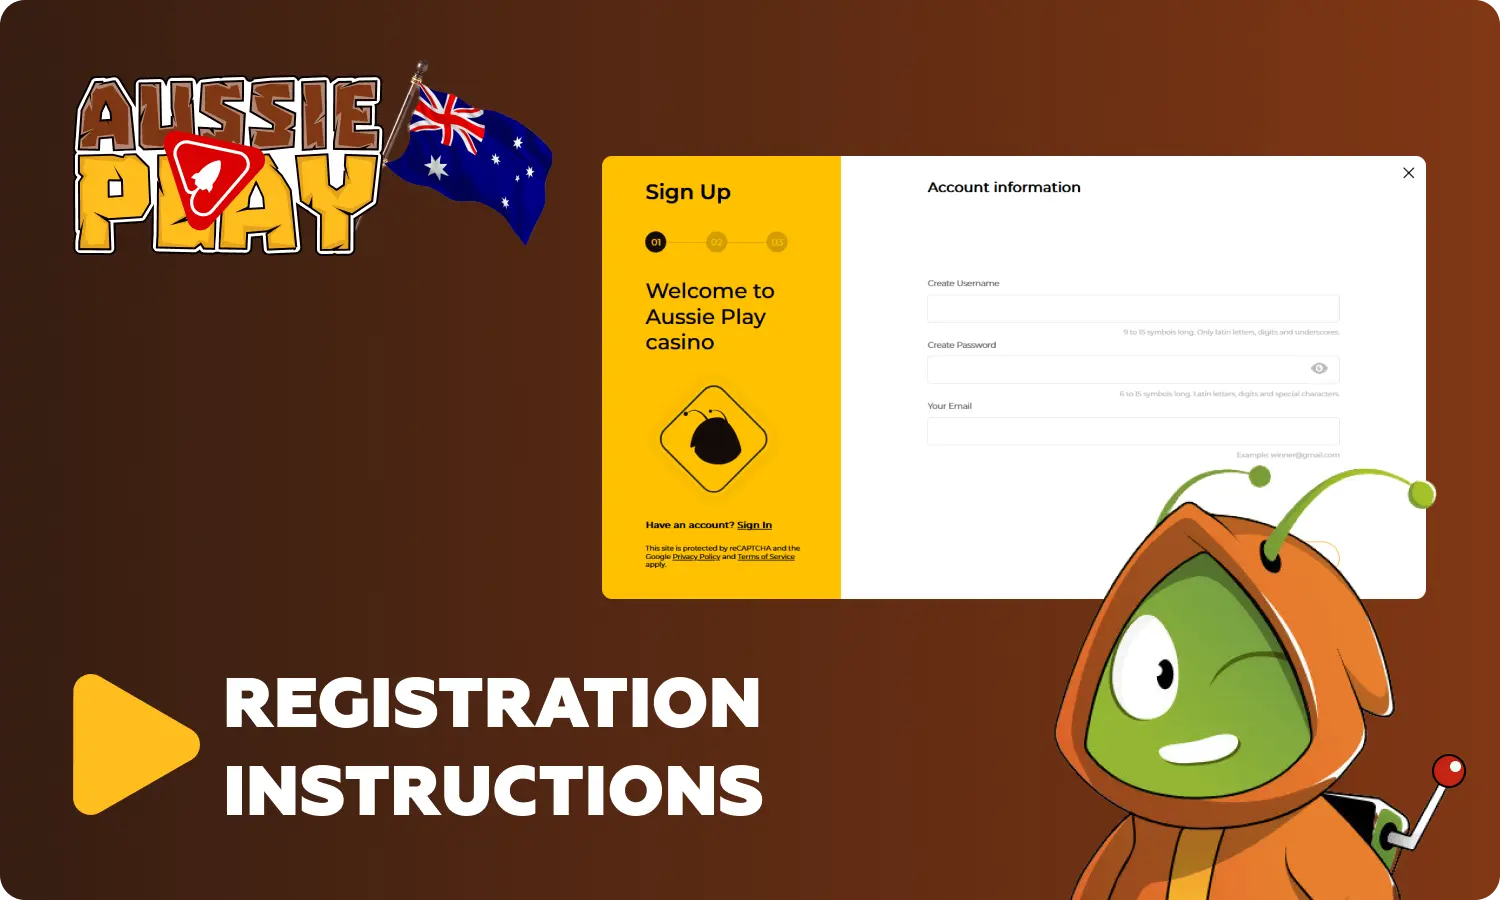 Registering at Aussie Play casino opens up all the benefits of the site to players from Australia